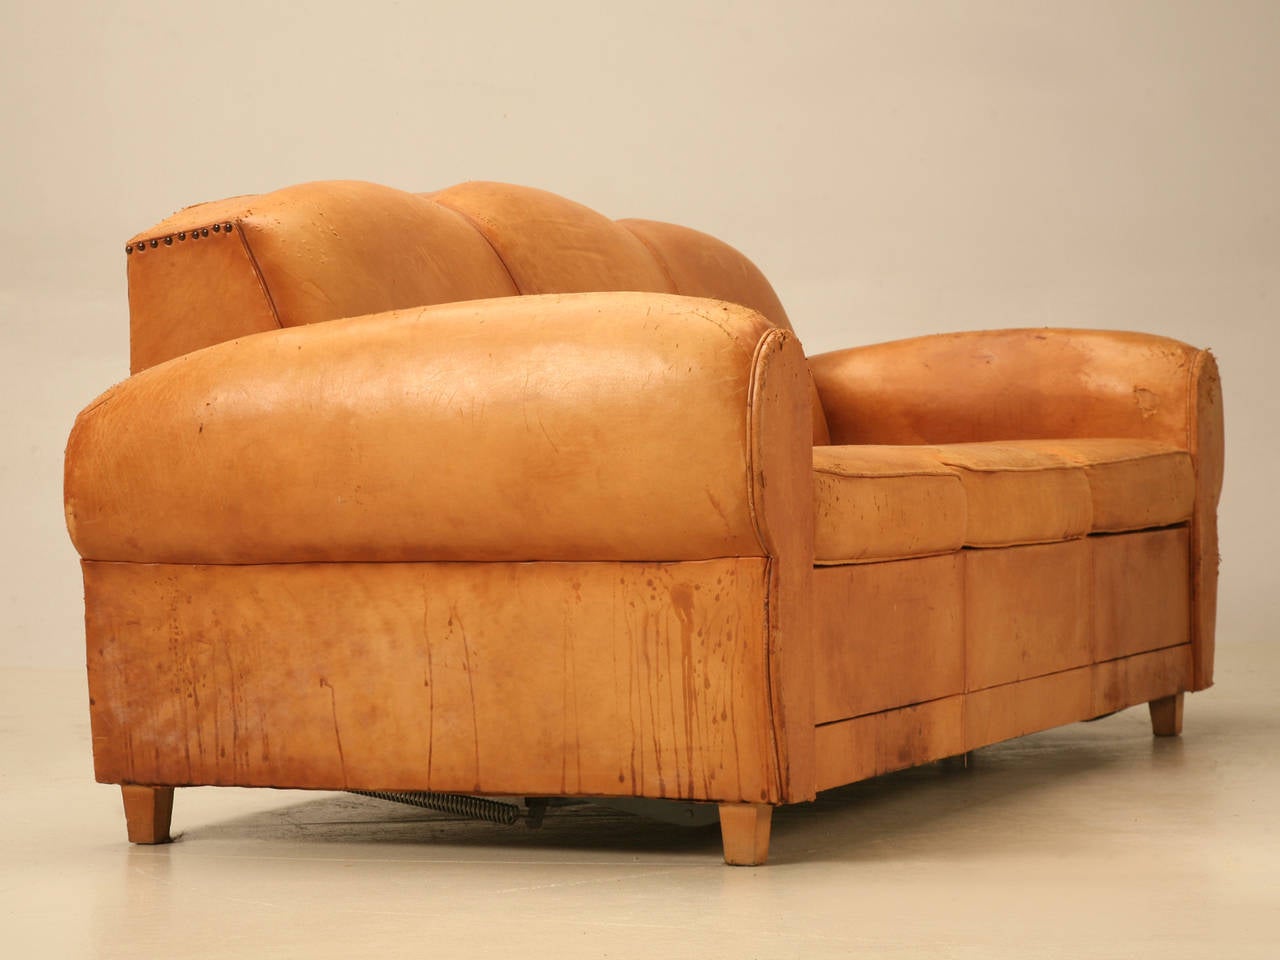 Vintage French Art Deco sofa that converts into a bed. All original leather and please note the cat scratches on the arms. The bed mechanism can be removed for softer seating should you desire.